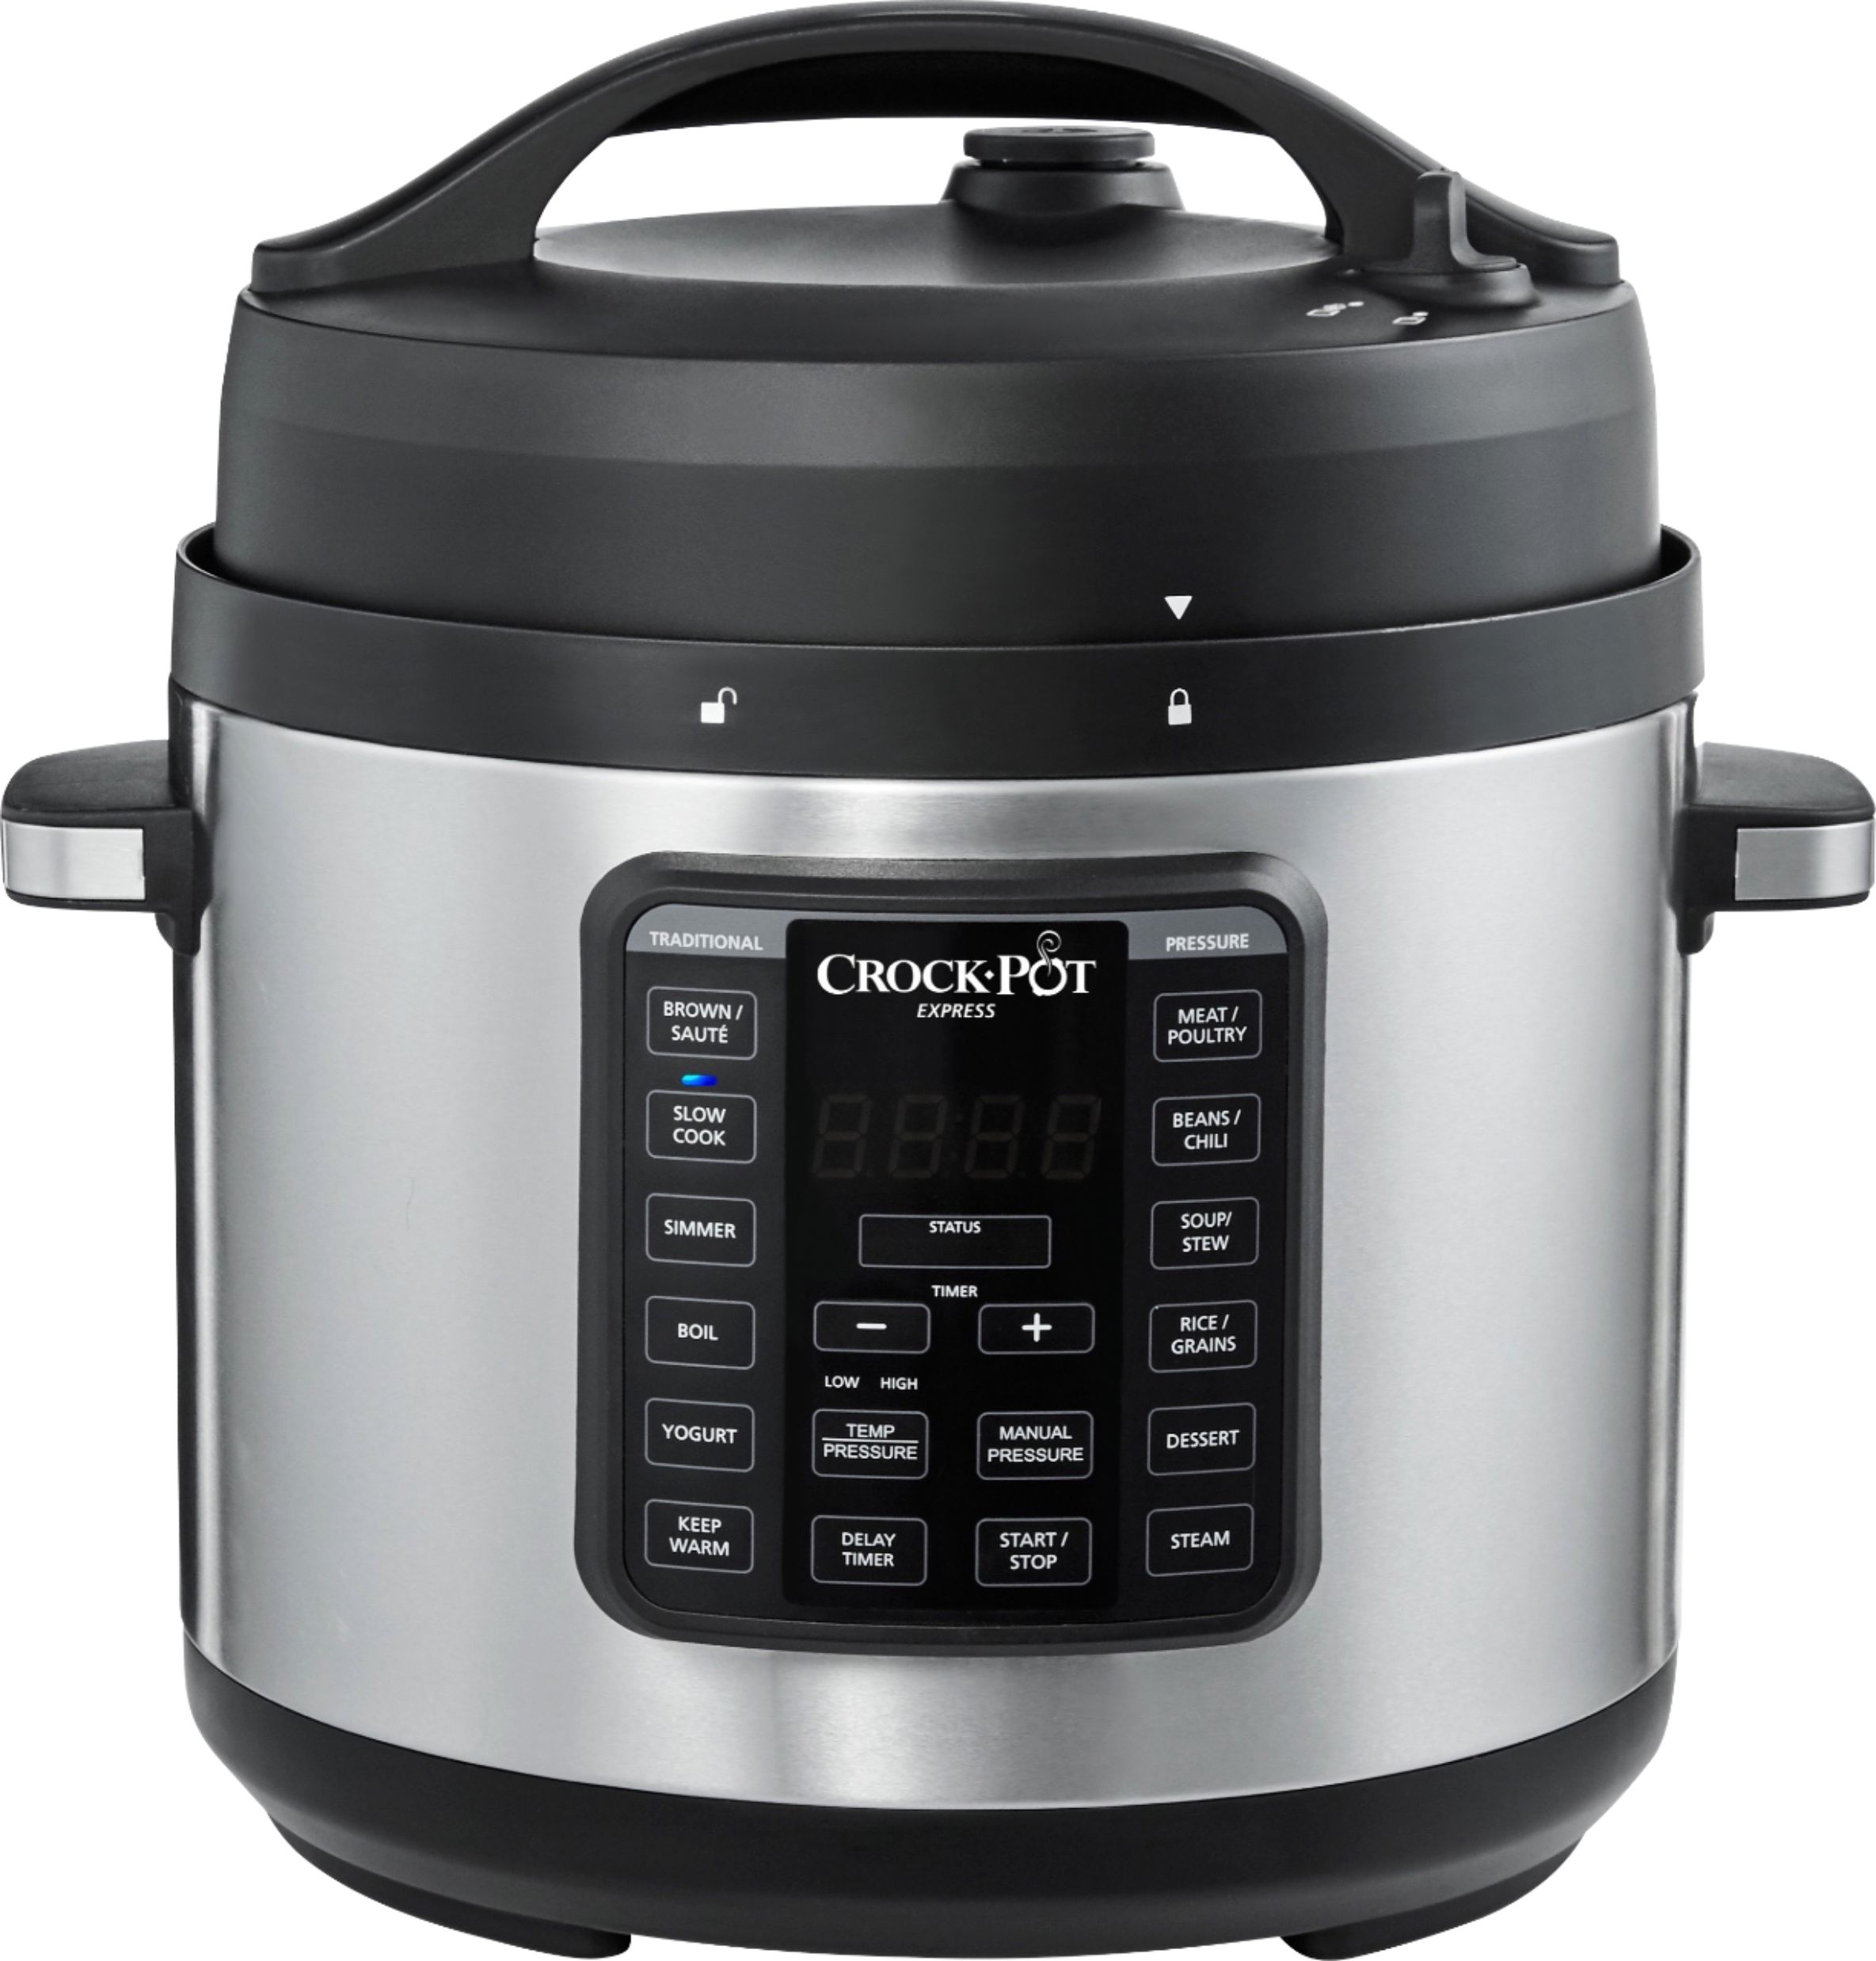 6-Qt Crock-Pot Express Easy Release Multi-Cooker (Stainless Steel) $35